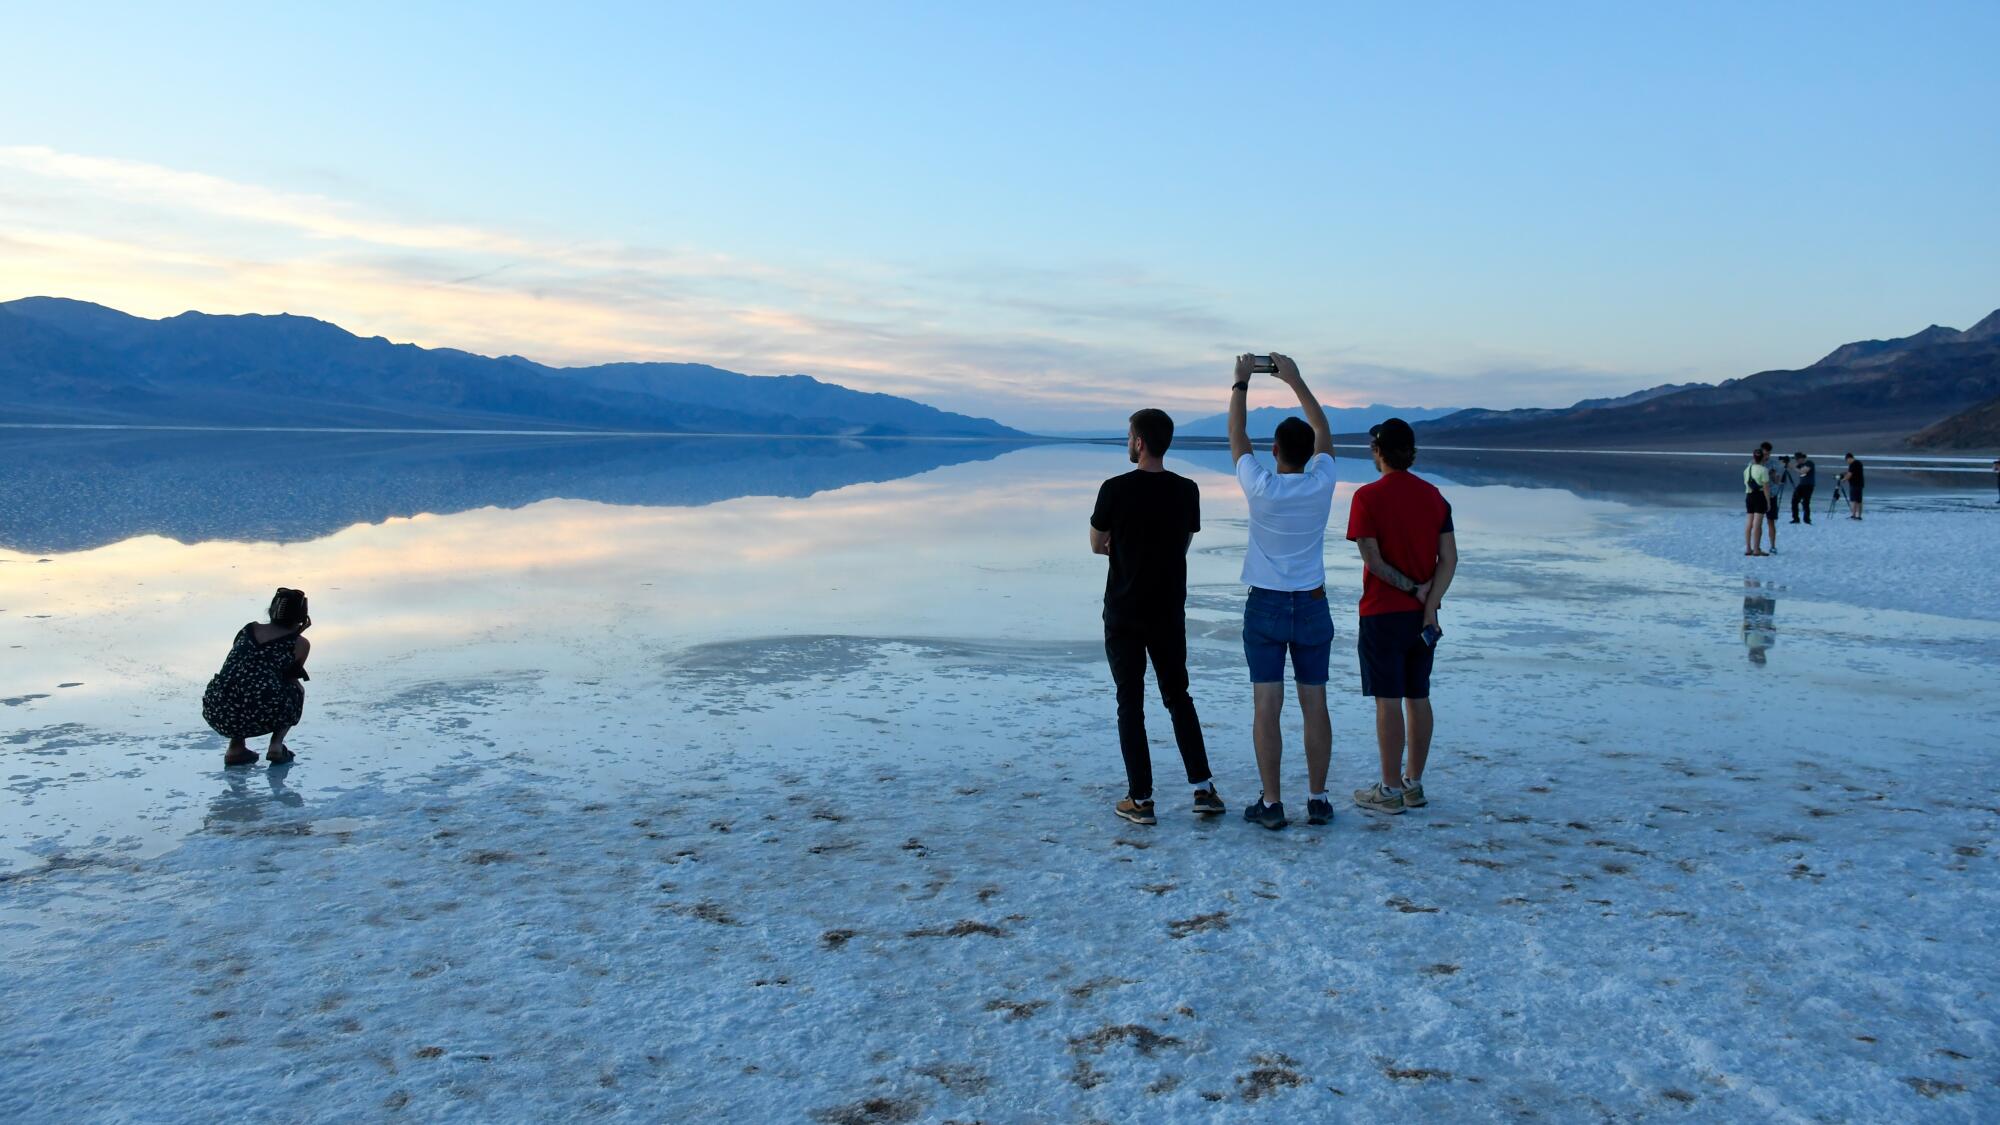 Visitors take in Badwater Basin in Death Valley National Park.